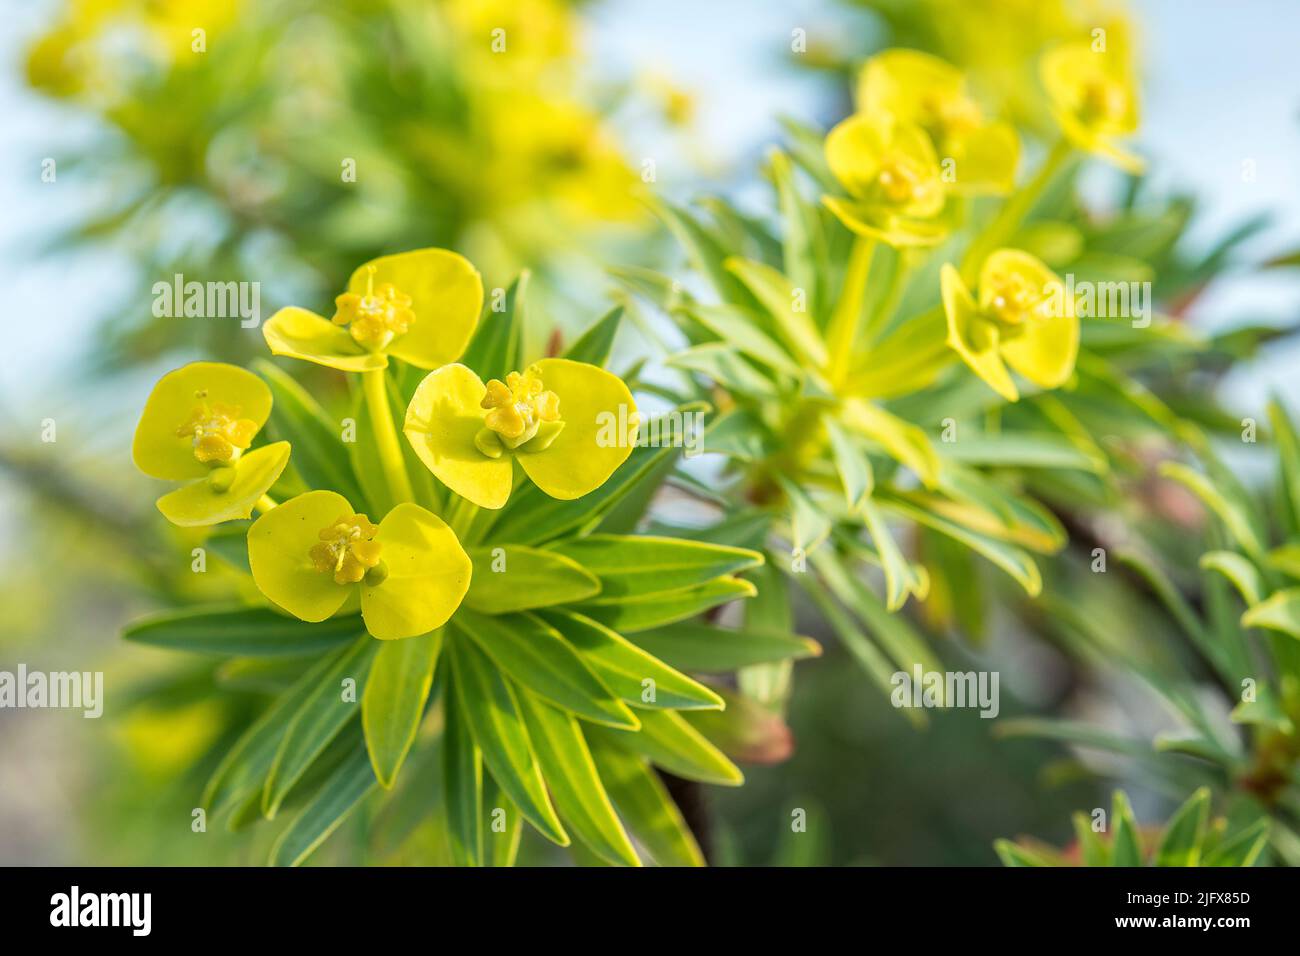 Euphorbia dendroides, also known as tree spurge, is a small tree or large shrub of the family Euphorbiaceae. Stock Photo